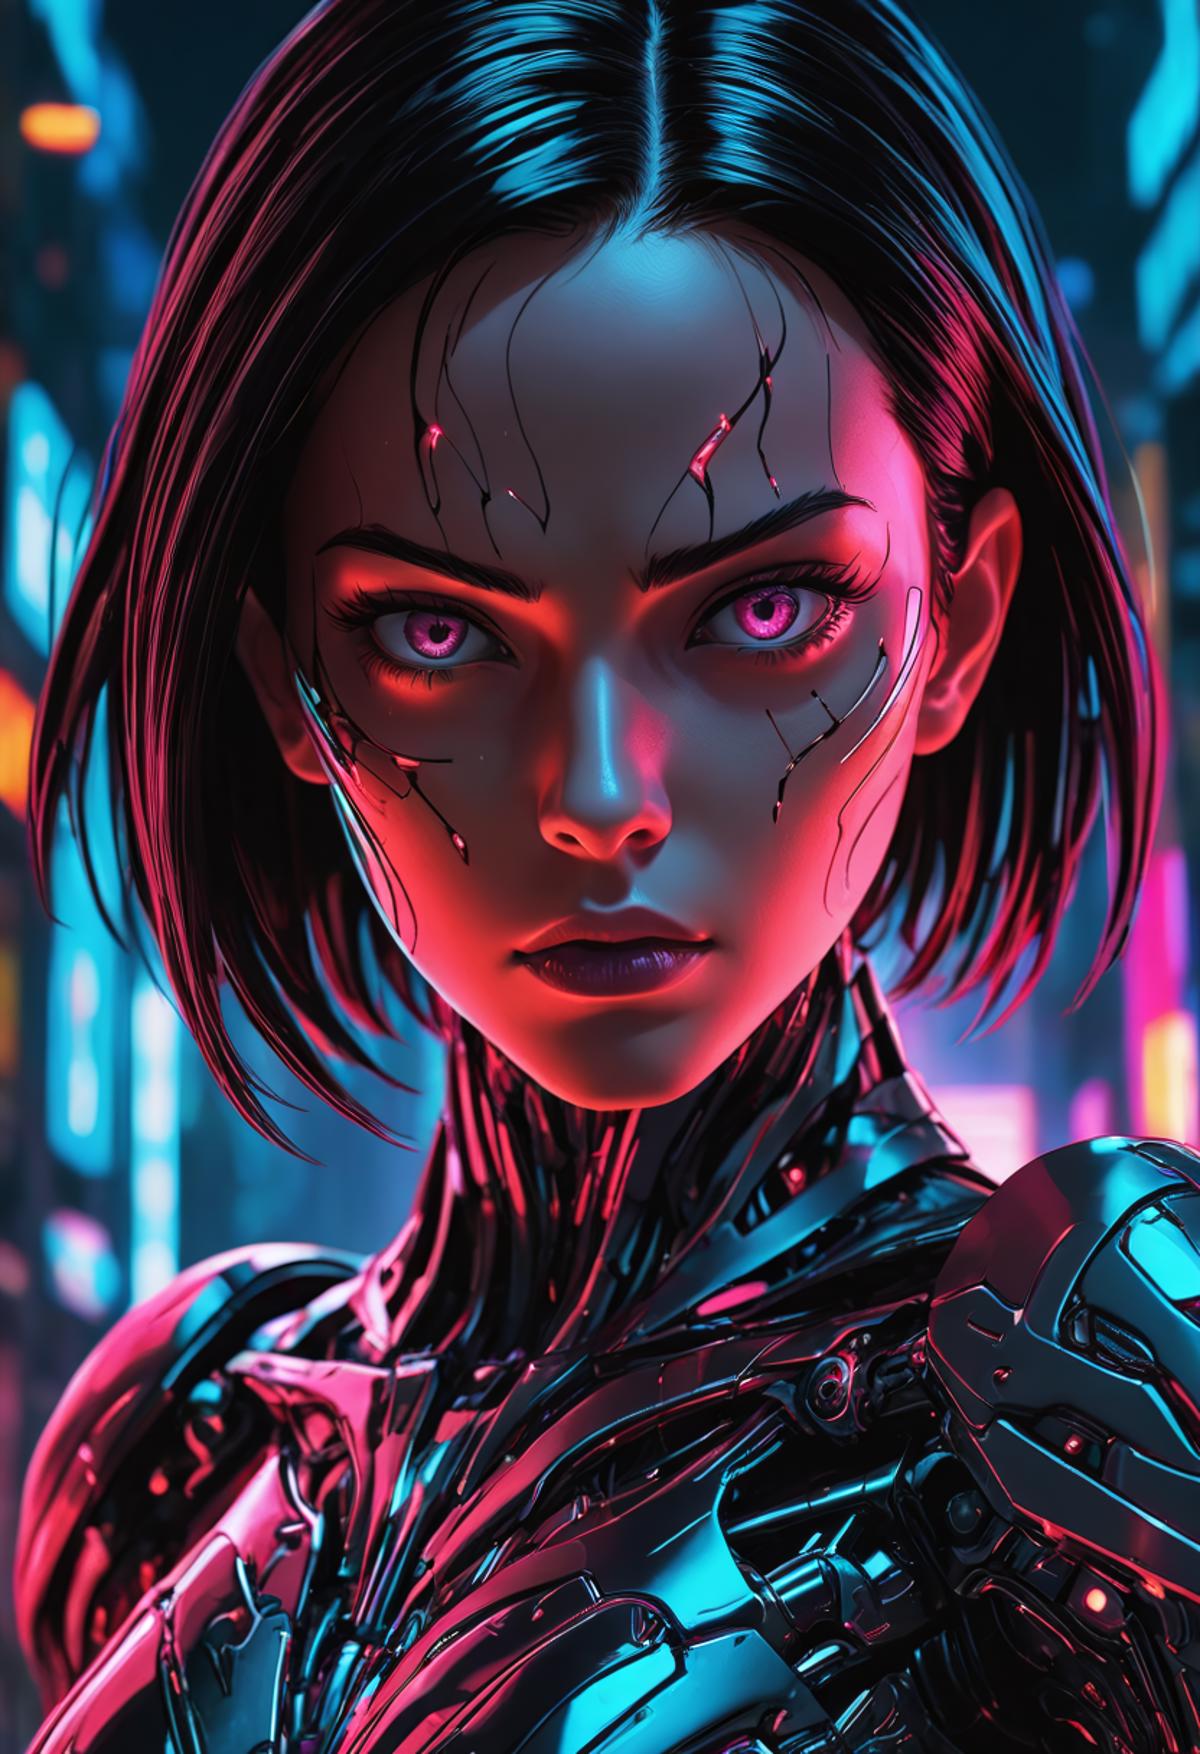 Artistic and Futuristic Image of a Woman with Purple Eyes and Cybernetic Enhancements